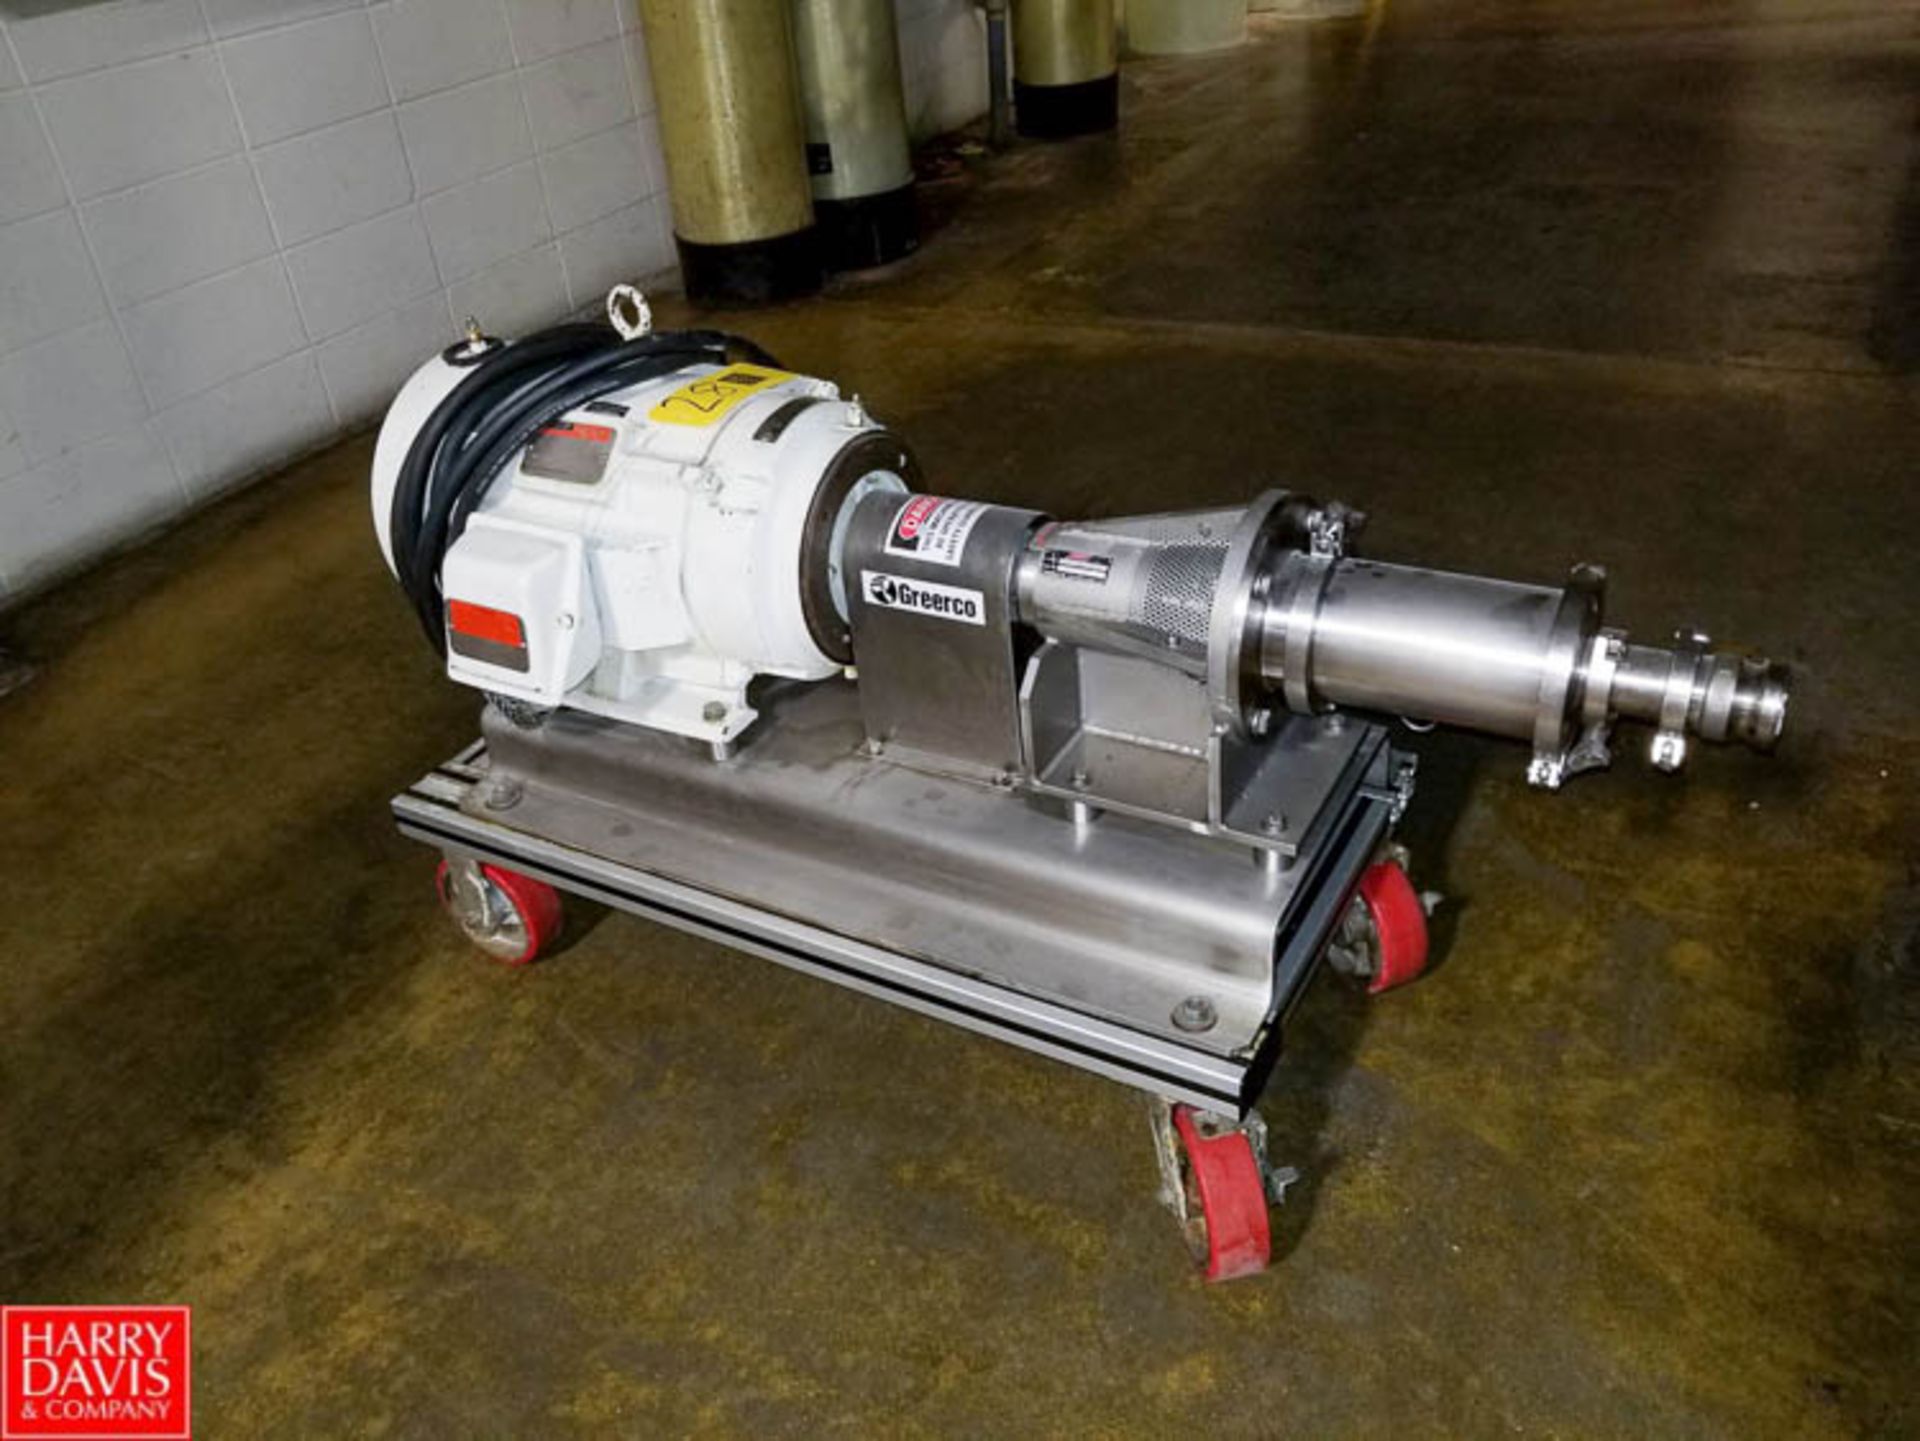 Greerco 15 HP Pipeline Mixer, 2.5" Inlet, 2.5" Outlet,  3,530 RPM, 230/460 V, 3 Ph., Model: